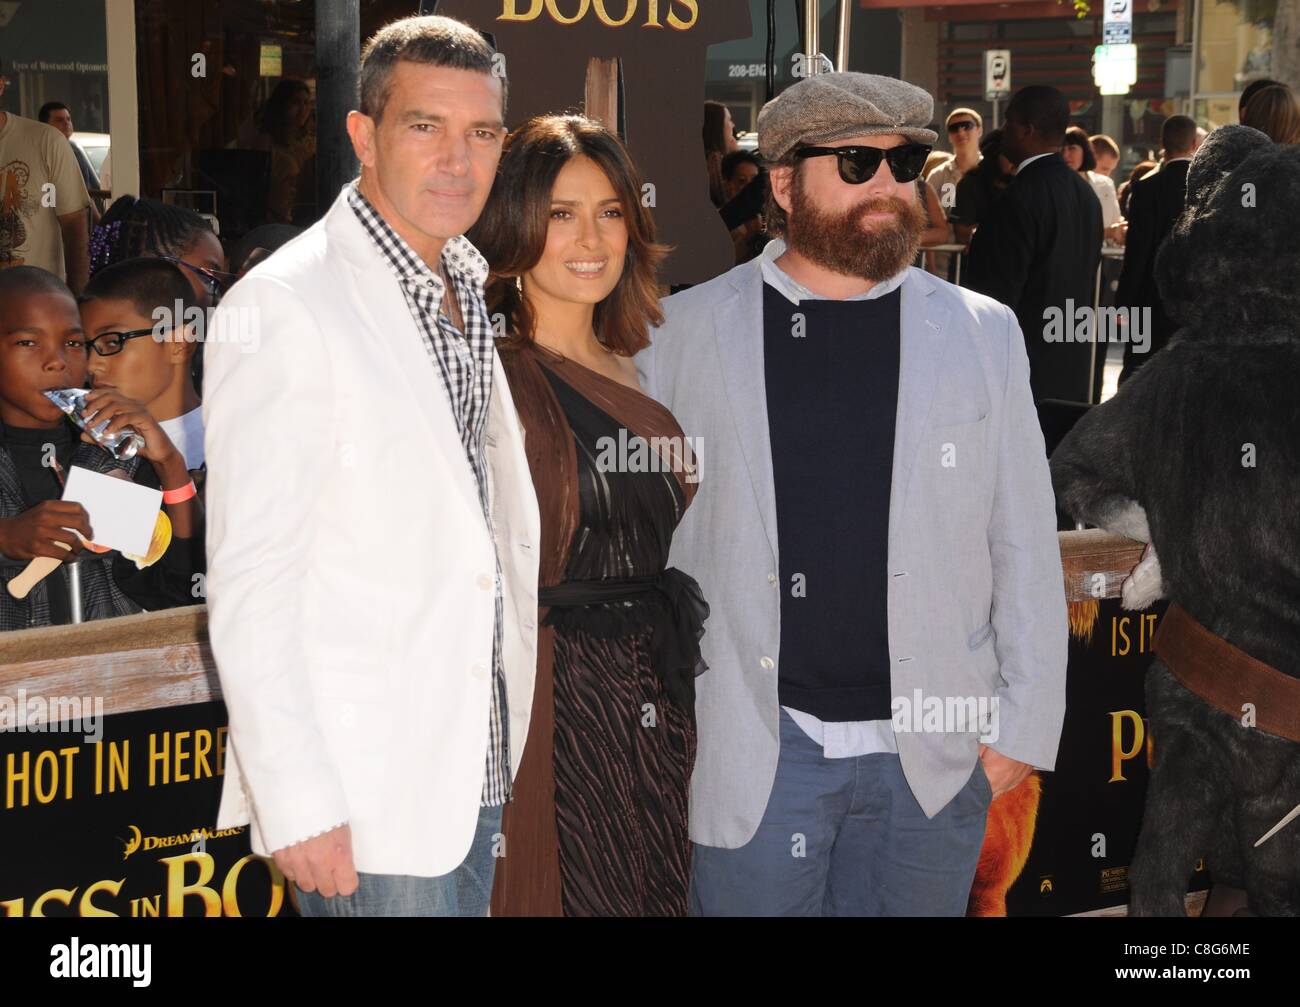 Salma Hayek, Antonio Banderas, Zach Galifanakis at arrivals for PUSS IN BOOTS Premiere, Regency Village Theater in Westwood, Los Angeles, CA October 23, 2011. Photo By: Dee Cercone/Everett Collection Stock Photo